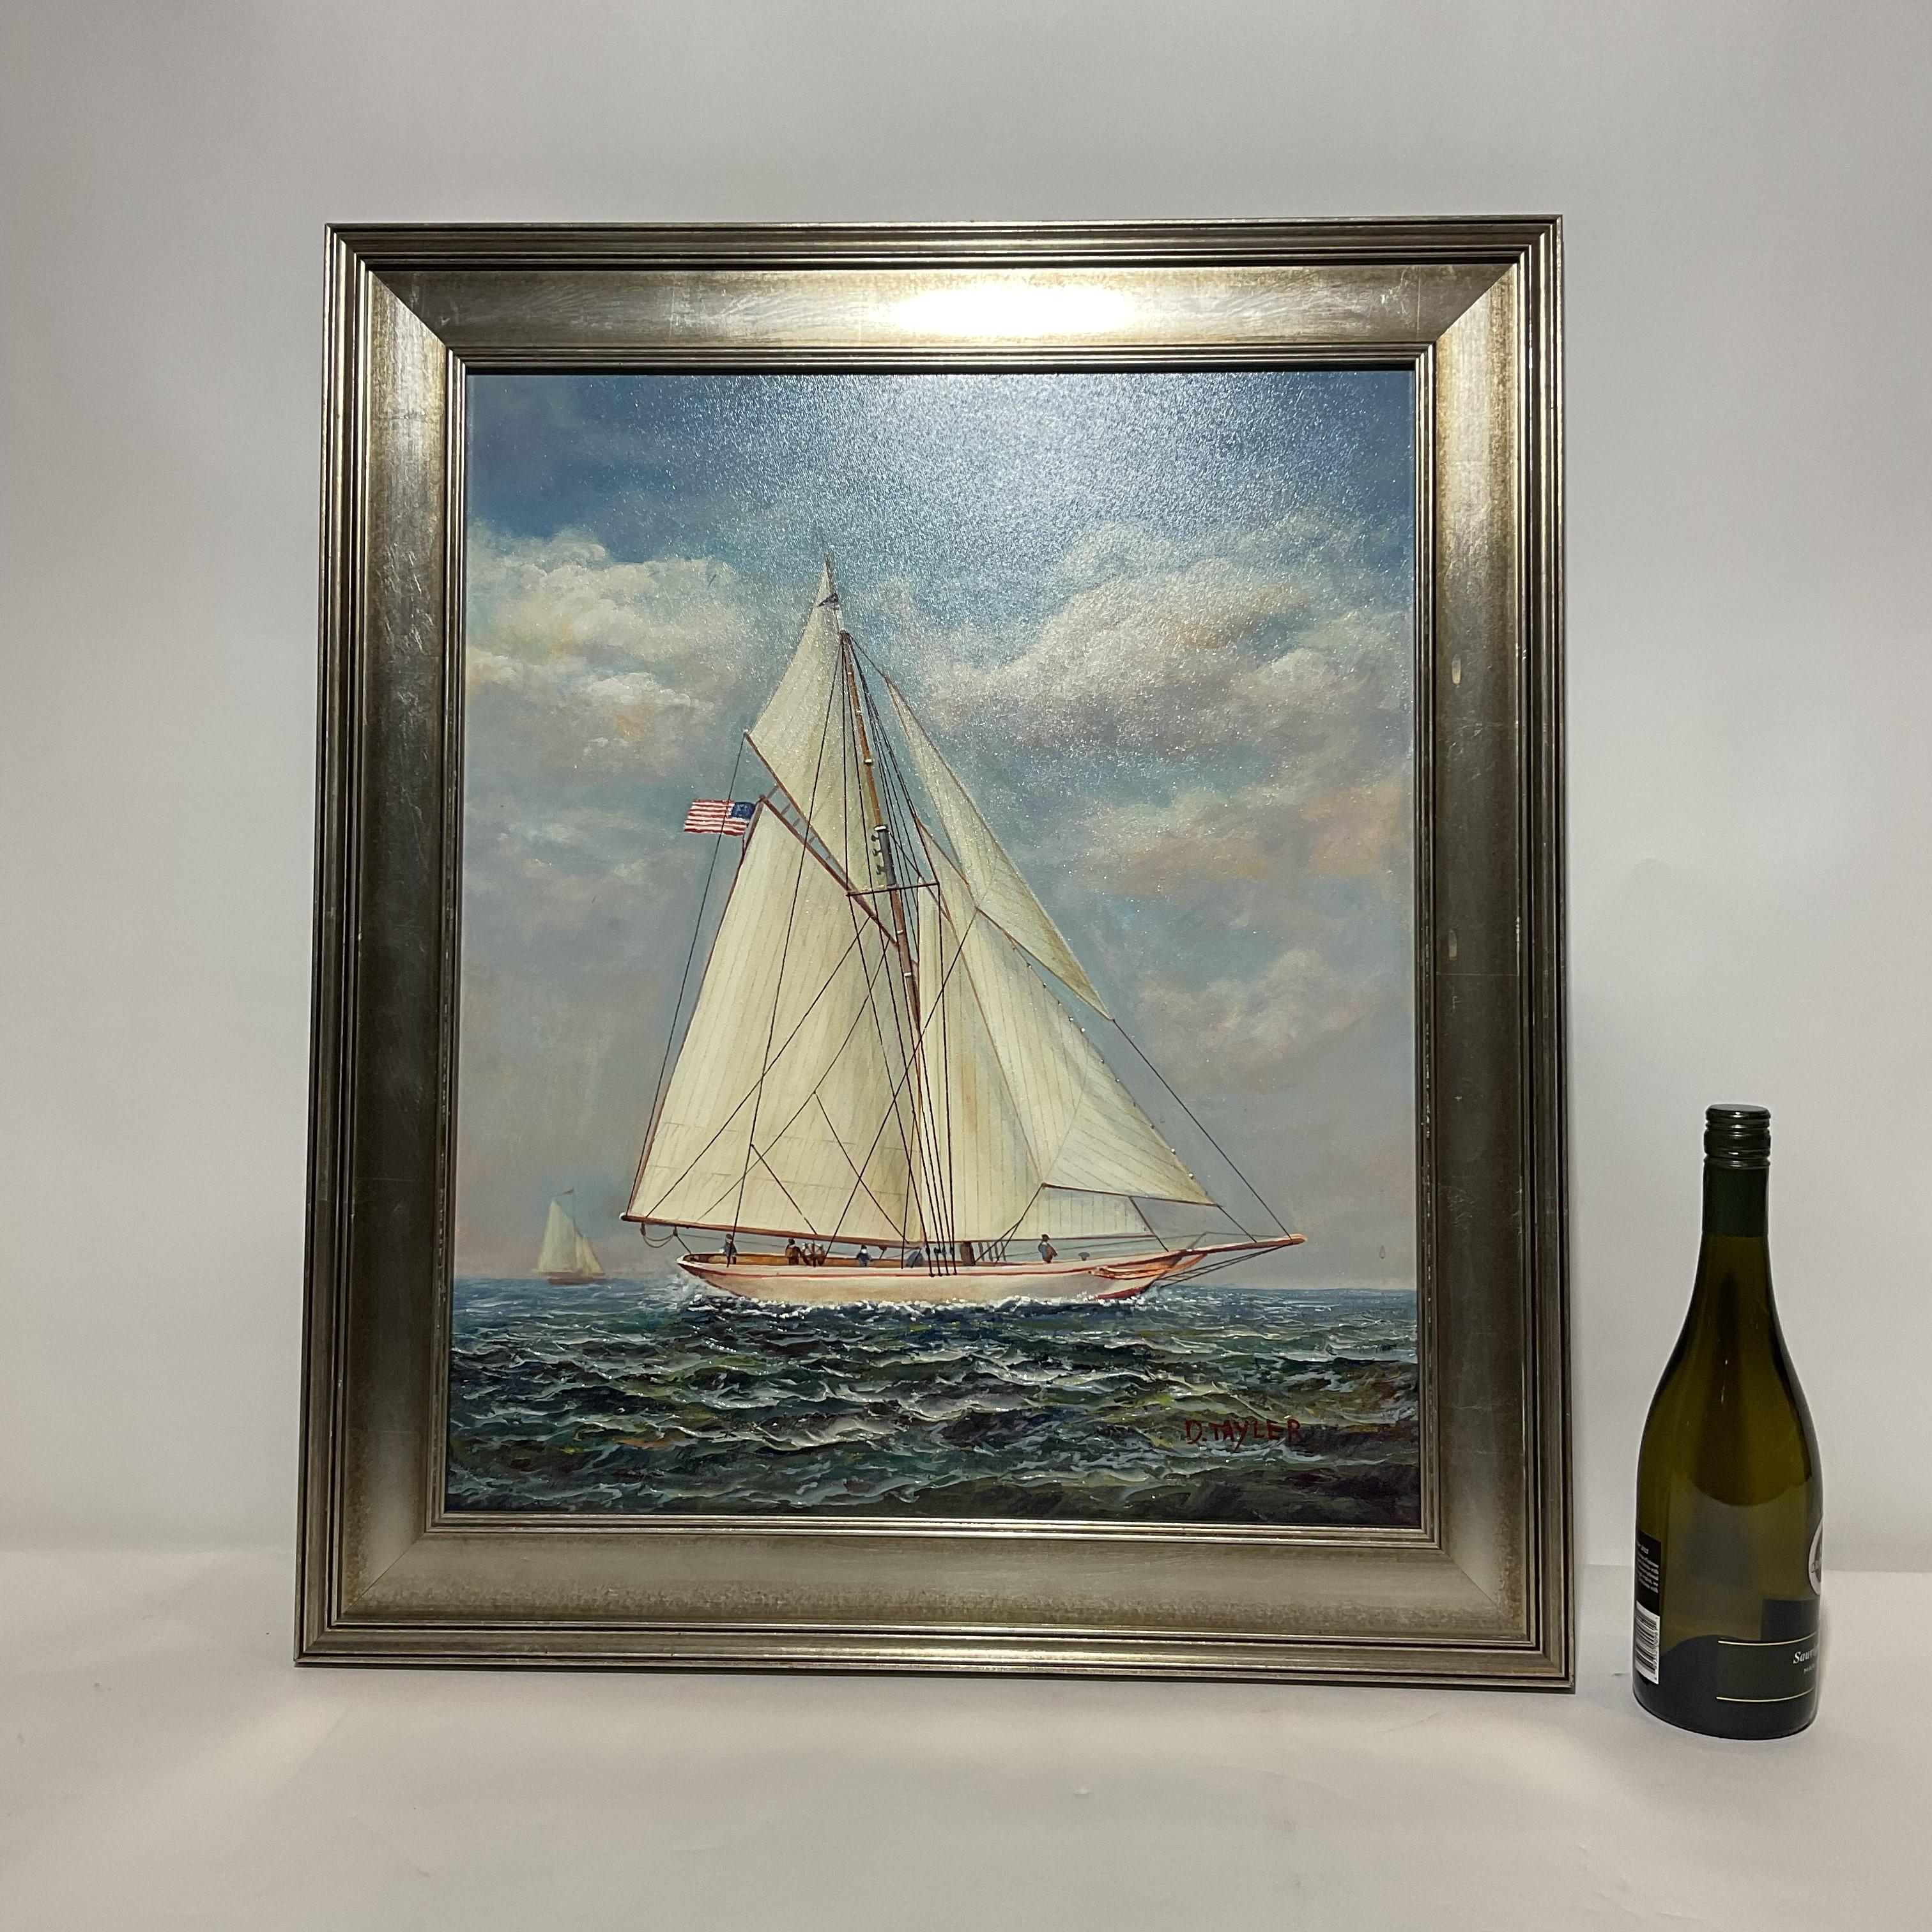 Oil on canvas nautical painting showing a gaff-rigged sailing yacht with a full suit of sails cruising through moderate seas with people on deck. Wood frame. Signed D. Tayler, lower right.

Weight: 8 lbs
Overall Dimensions: 30